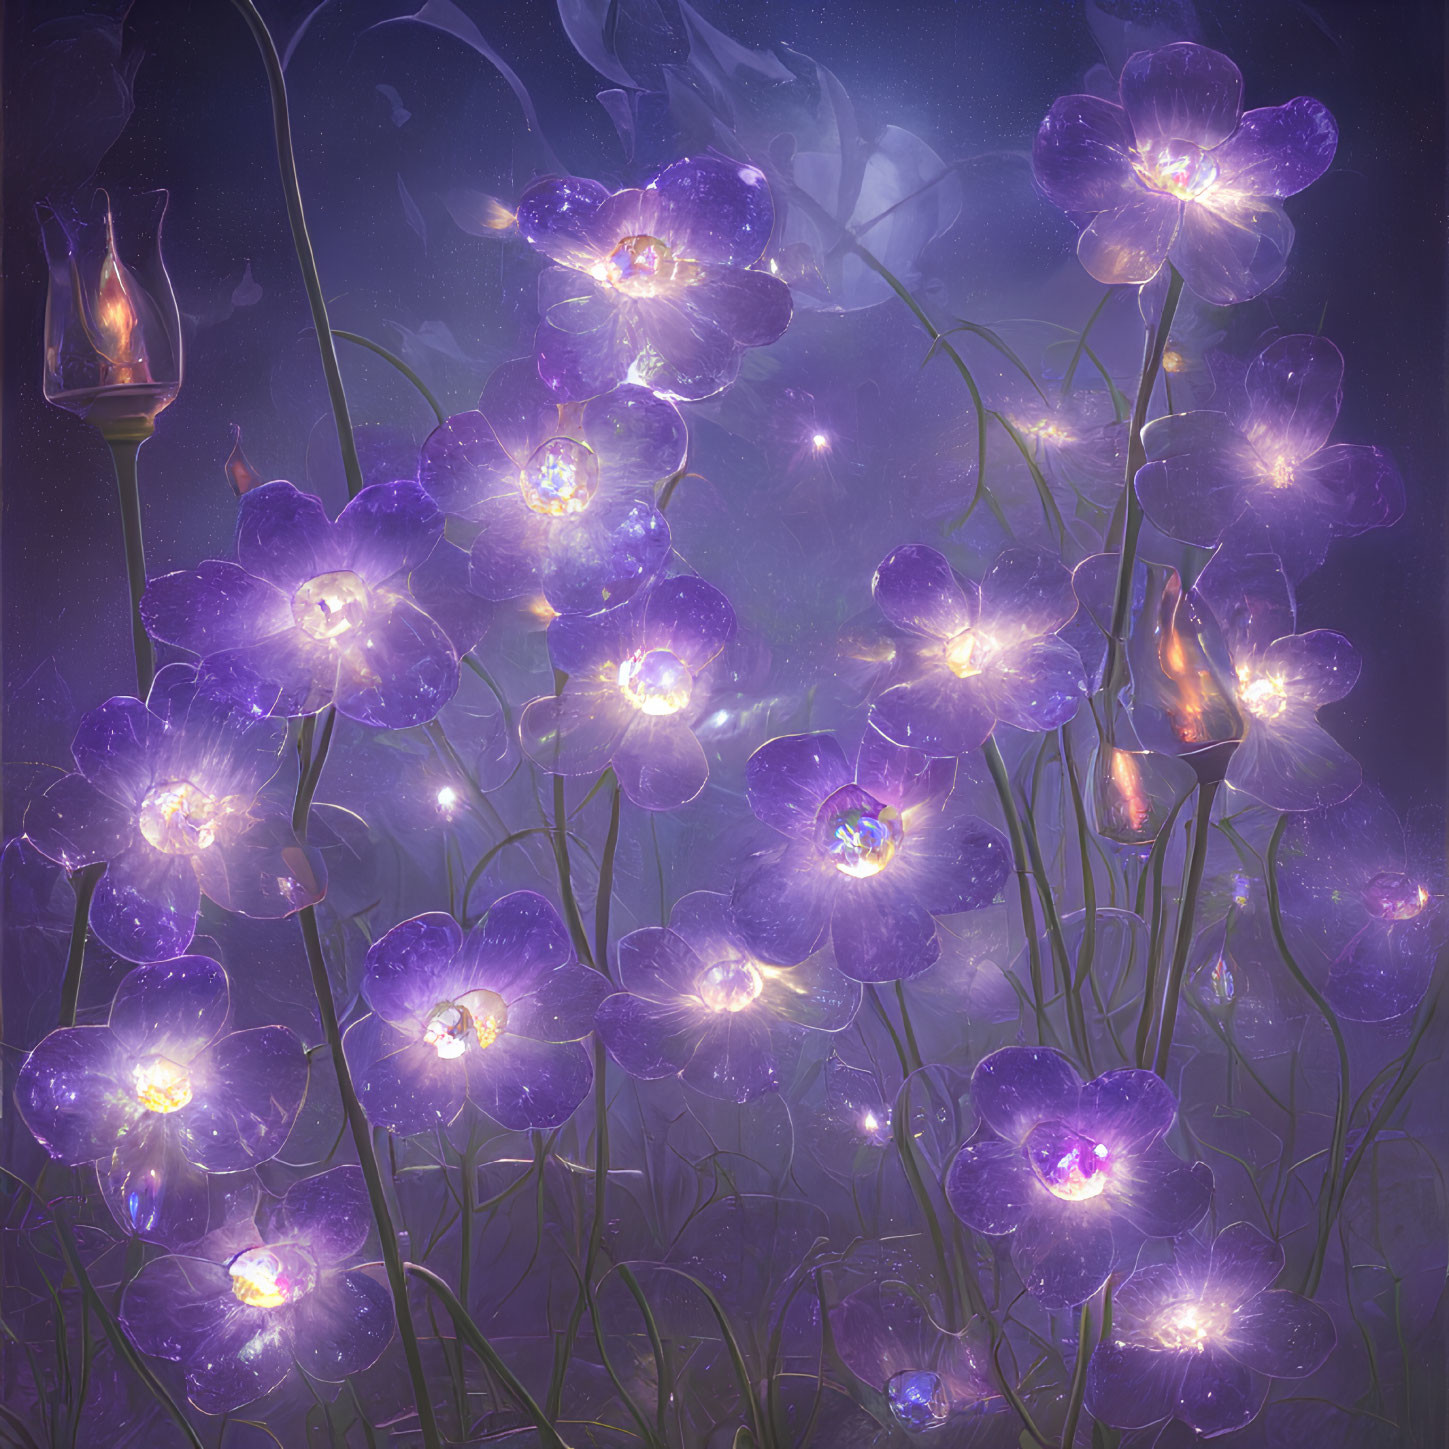 Purple illuminated flowers and fantasy lanterns in a magical setting